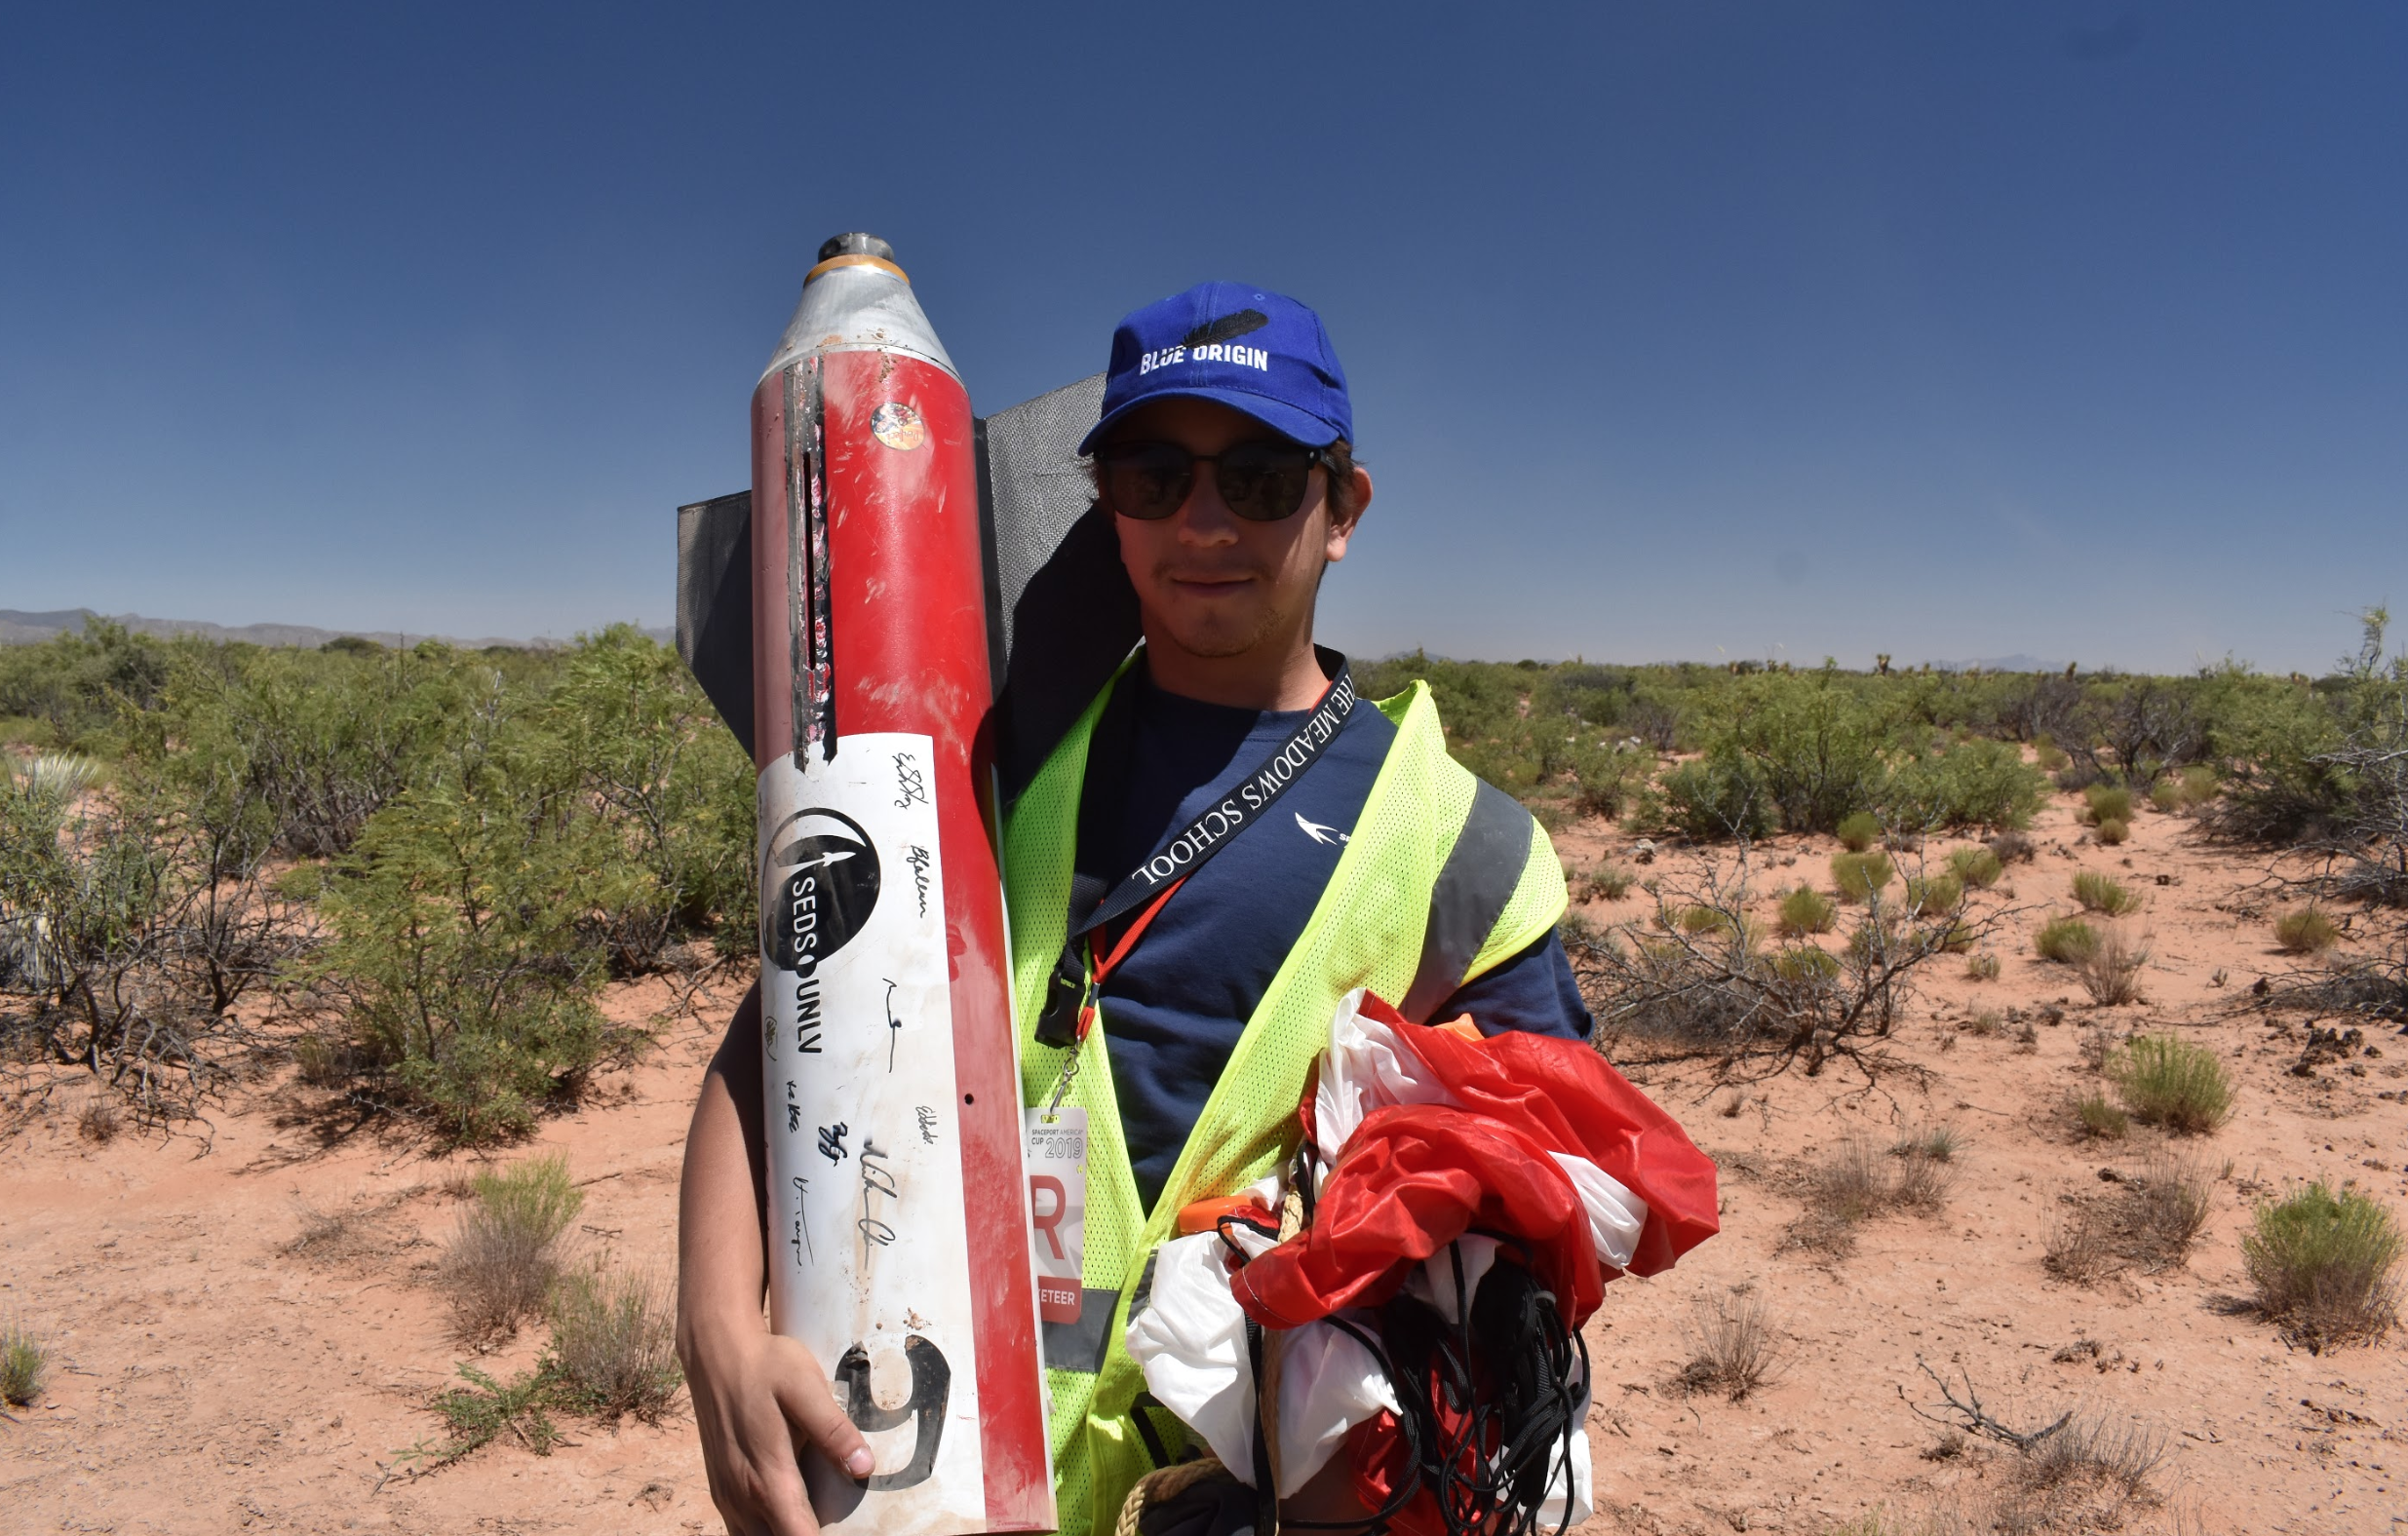 Brandon Avendano holding the rocket after recovery